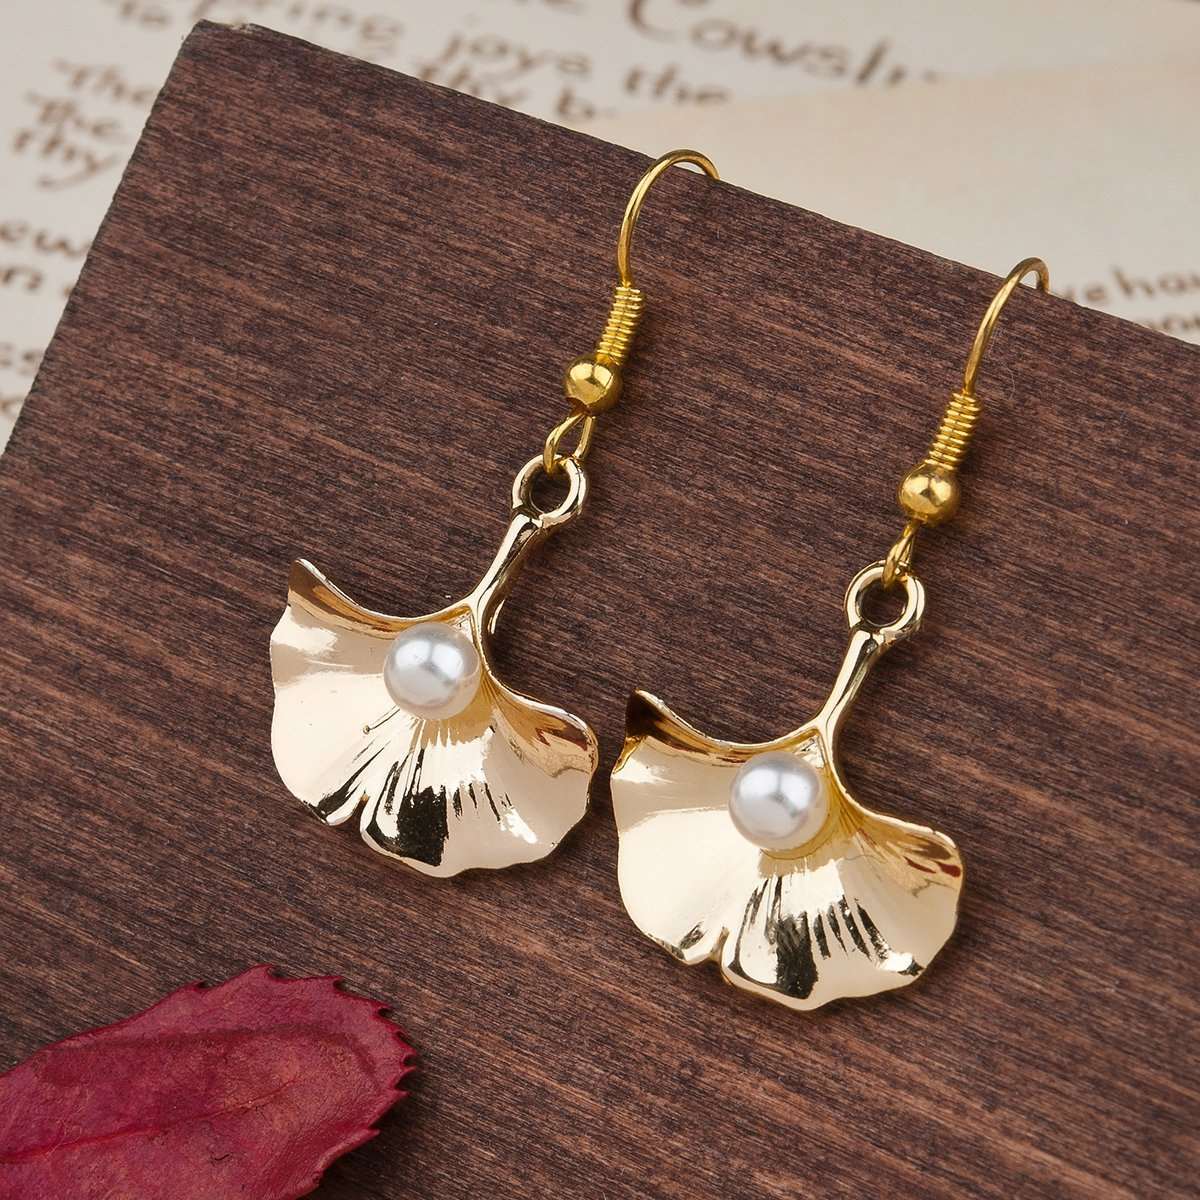 Gold Gingko Leaf with Imitation Pear Earrings - My Custom Tee Party